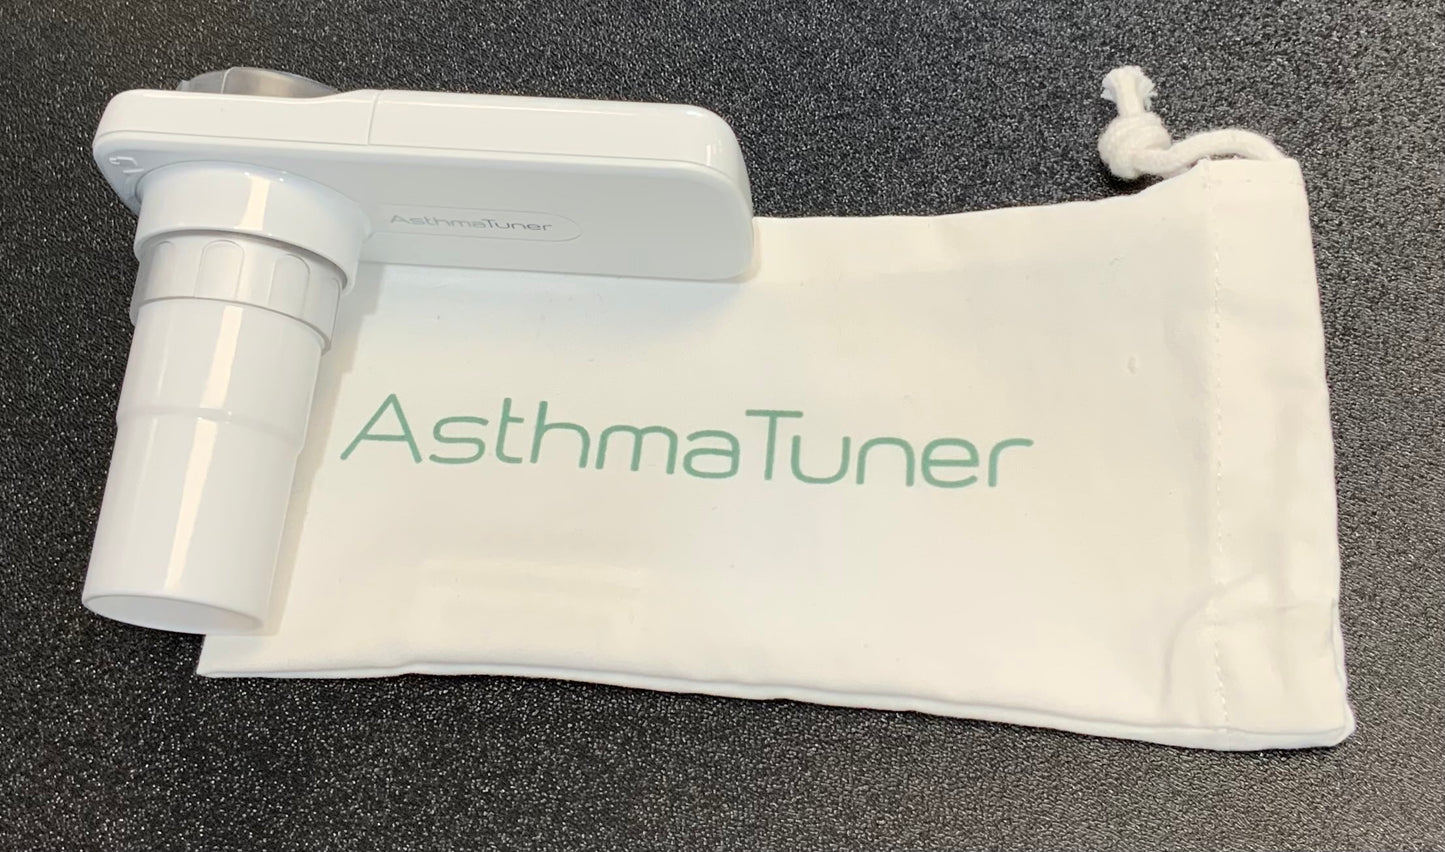 AsthmaTuner Home Spirometer Includes the 1st Year Treatment Plan on Mobile App